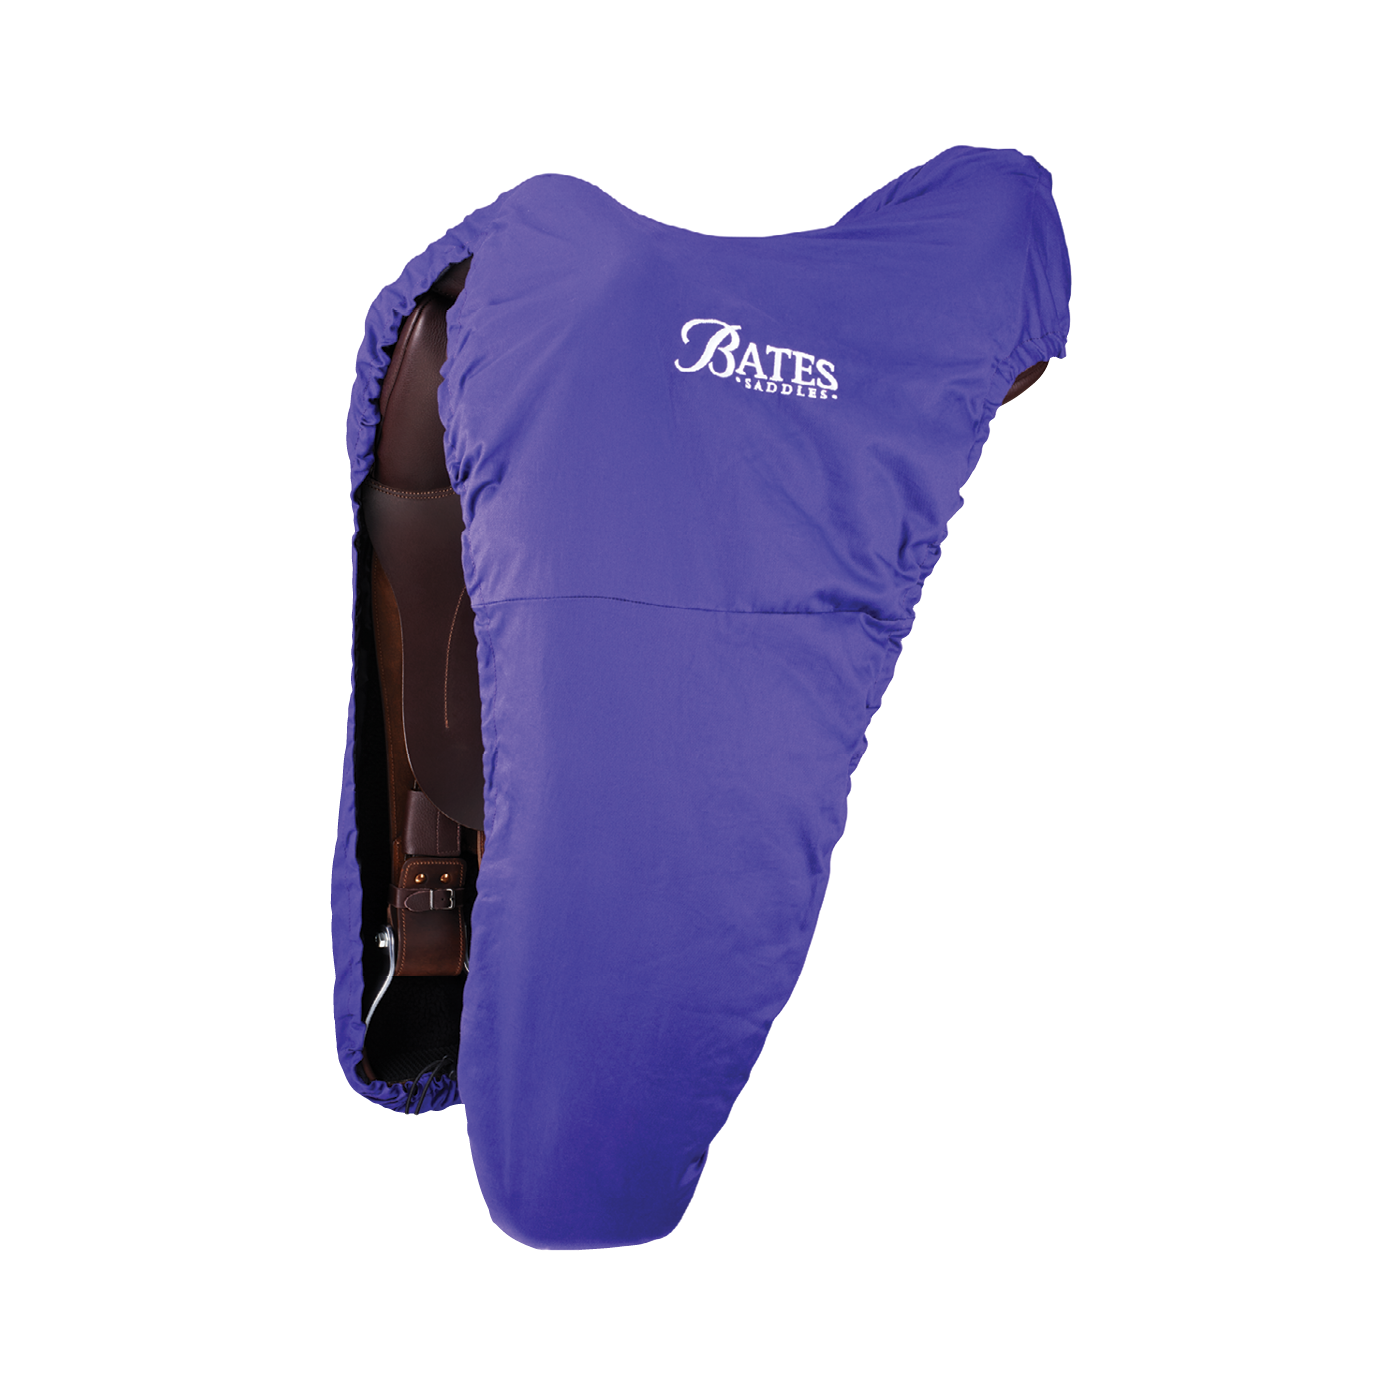 Bates Deluxe Saddle Cover